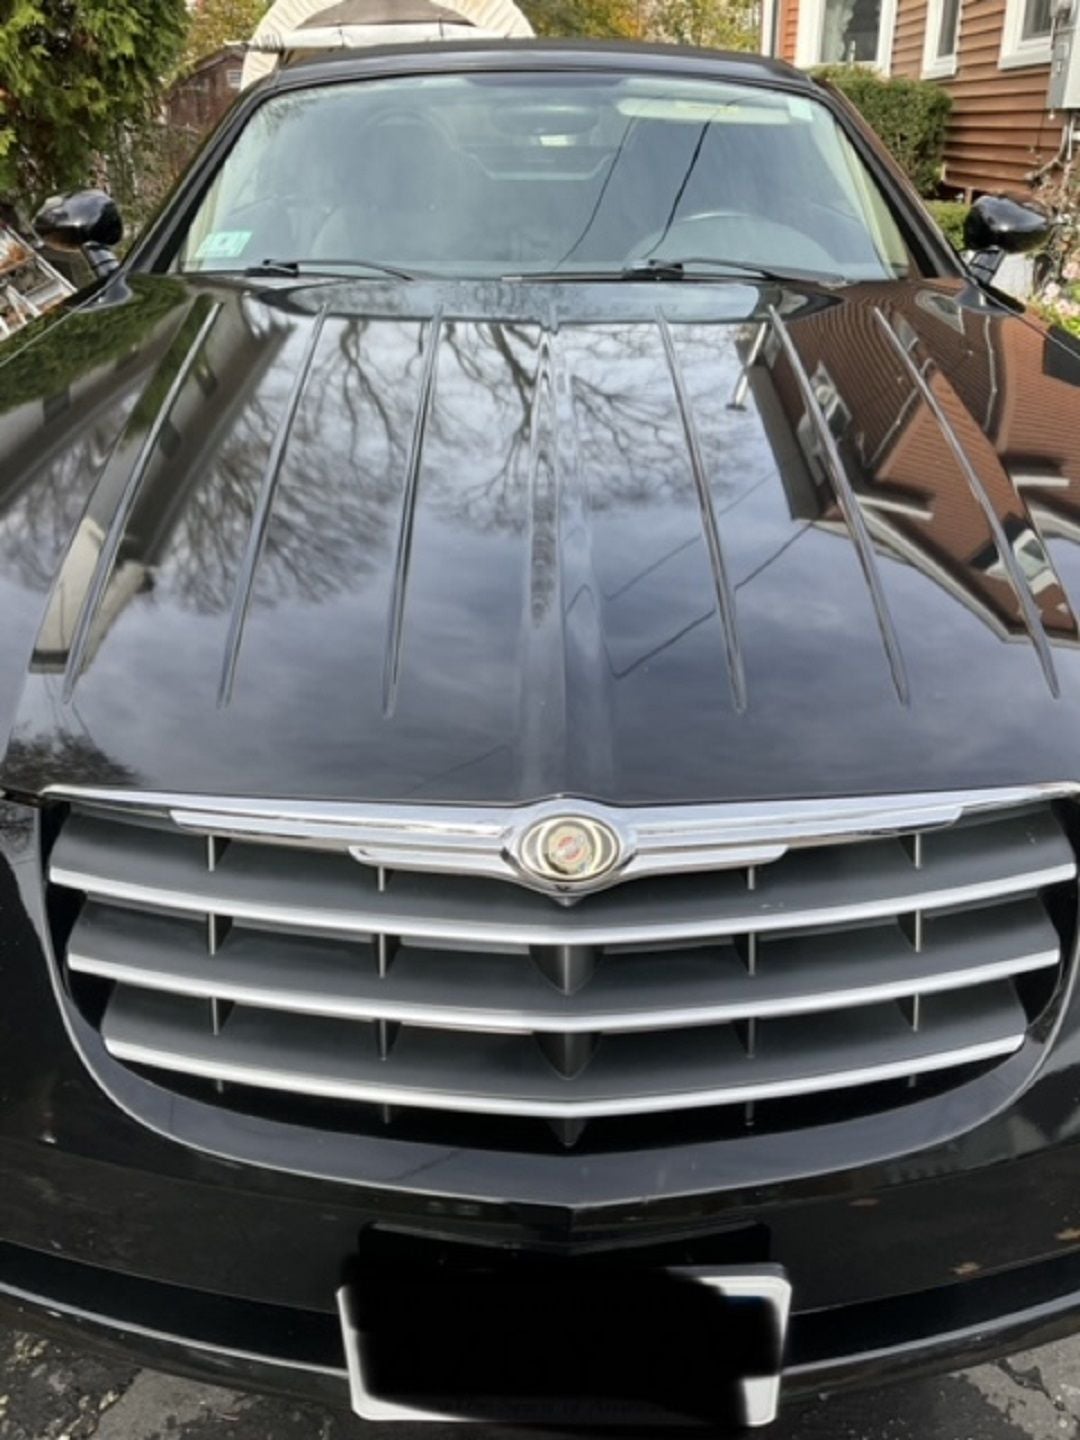 2005 Chrysler Crossfire - 2005 Crossfire roadster, convertible, near mint condition, clean everything. - Used - VIN 1c3an55l15x059311 - 78,777 Miles - 6 cyl - 2WD - Manual - Convertible - Black - Attleboro, MA 02703, United States